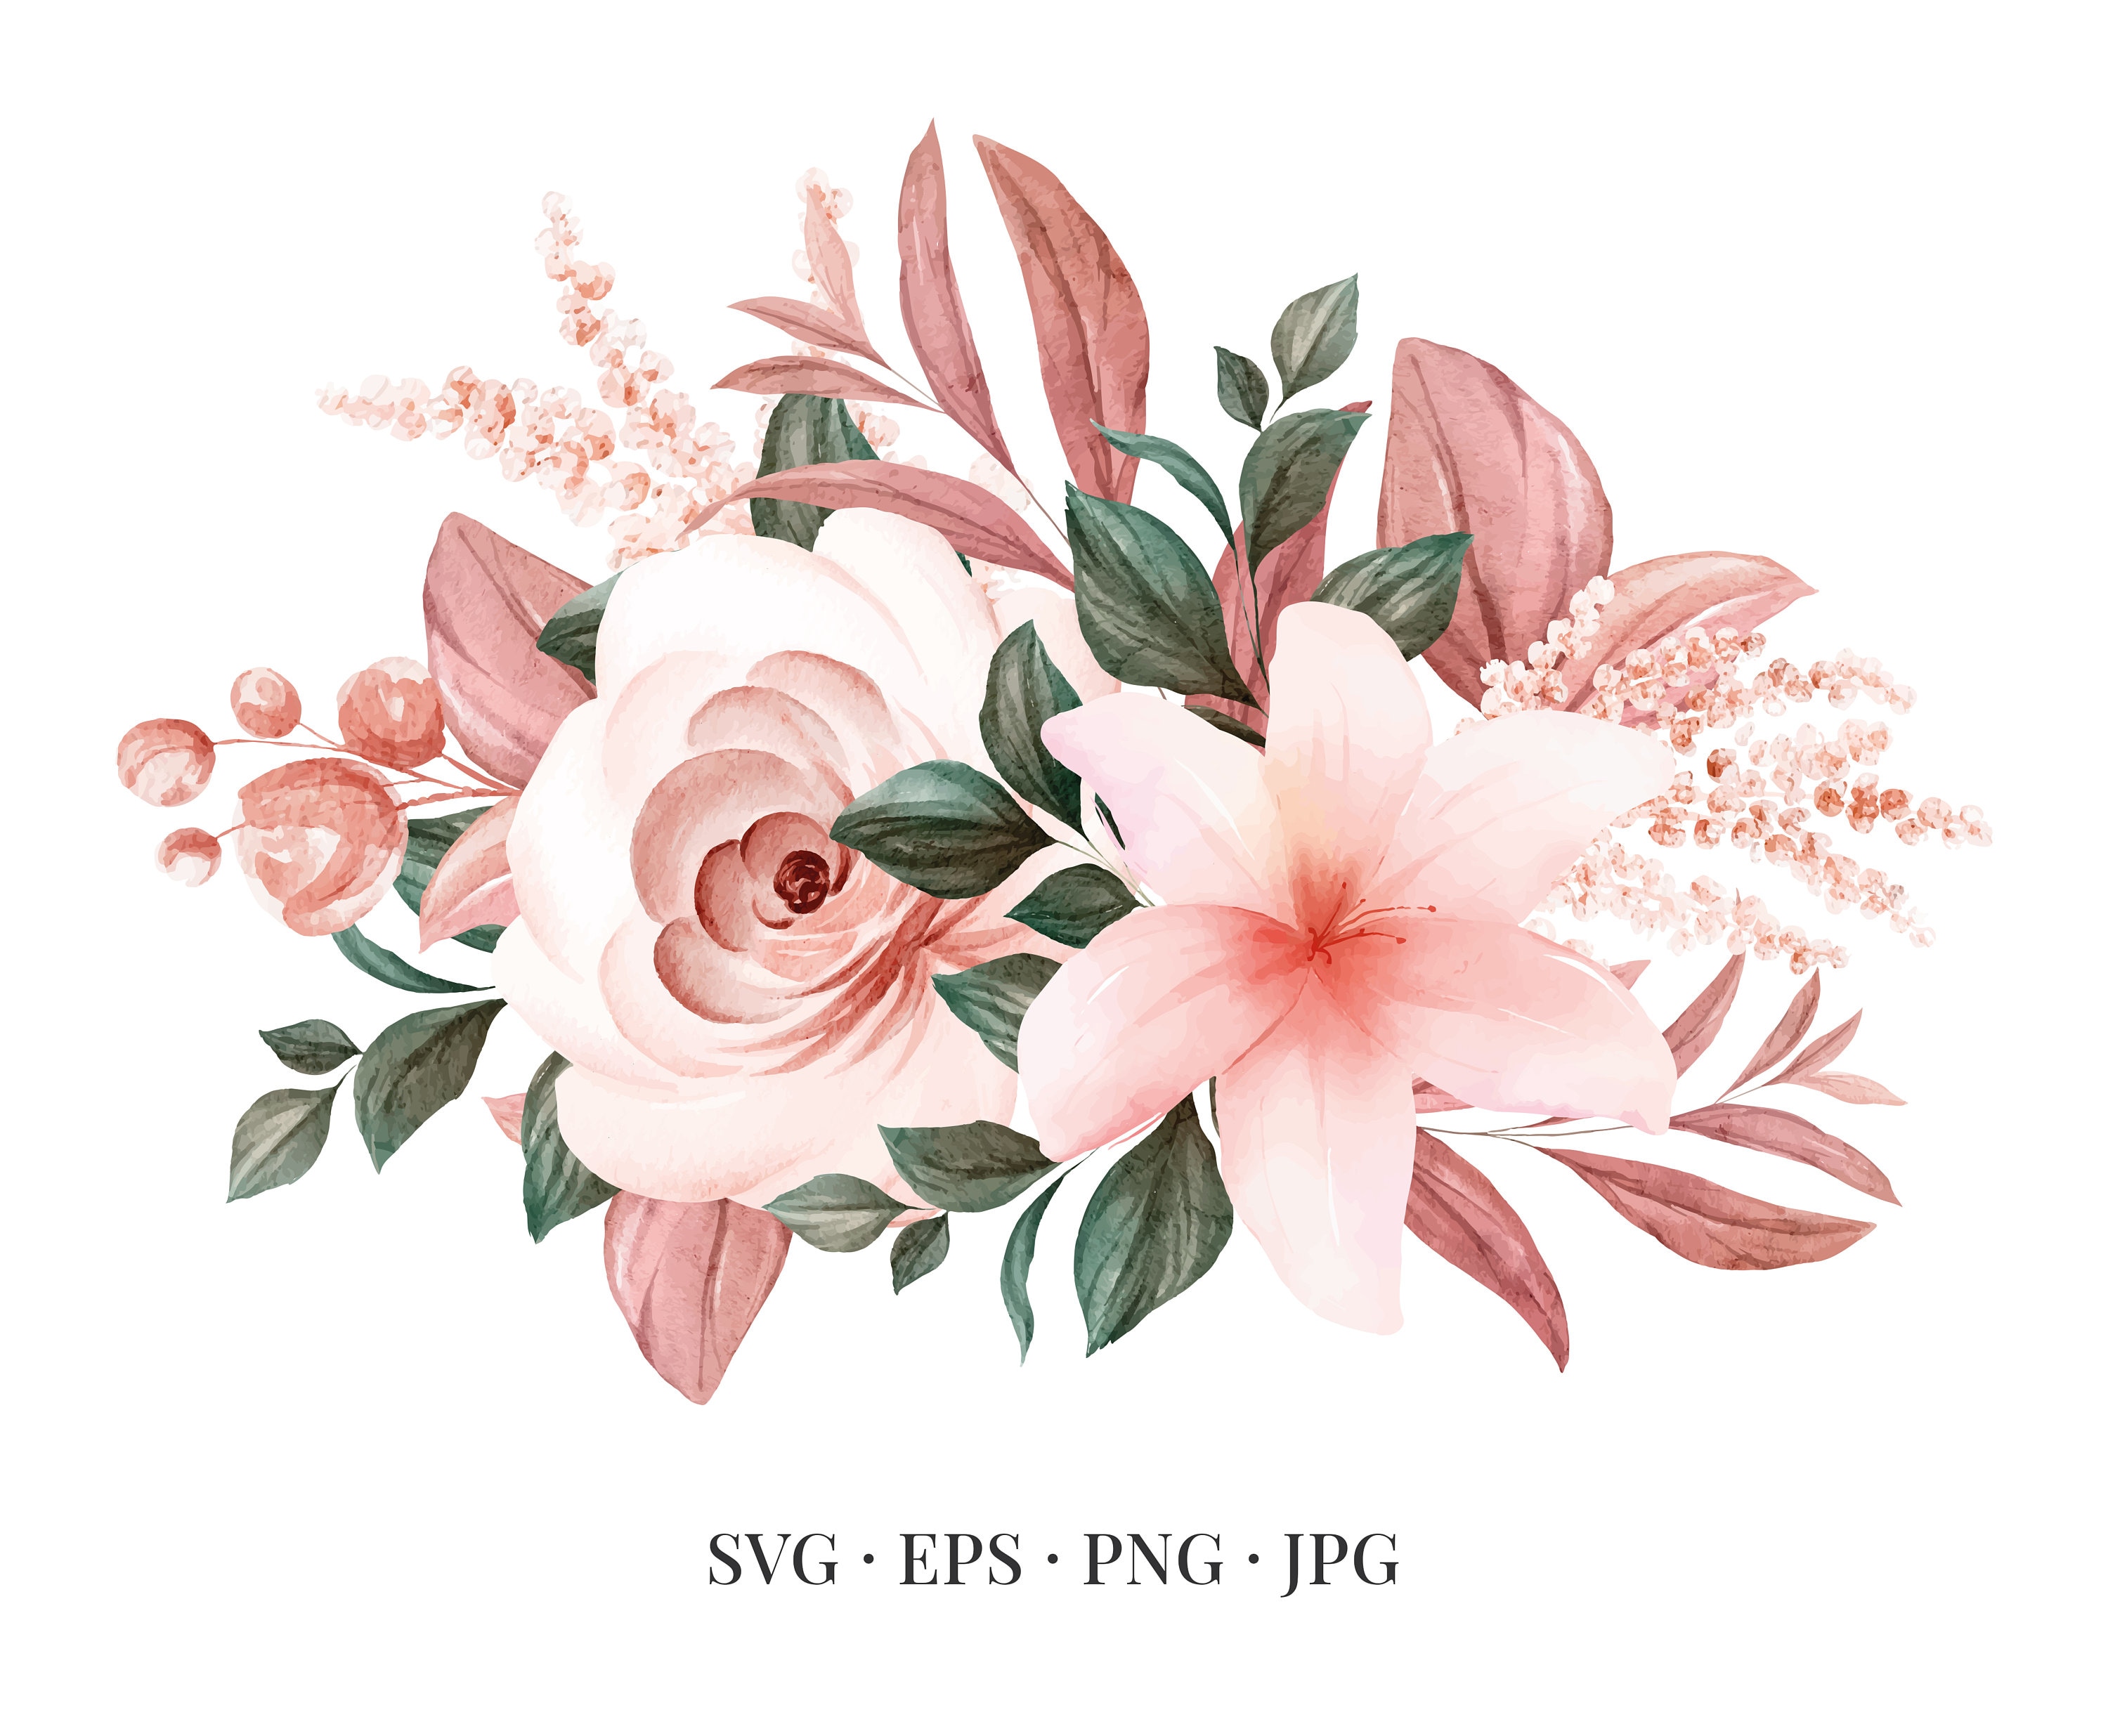 Bouquet of Flowers - Roses Floral Flower Floristic Watercolor - Svg Eps Png  Jpg - Image Clipart Vector Design Crafting Printable Download